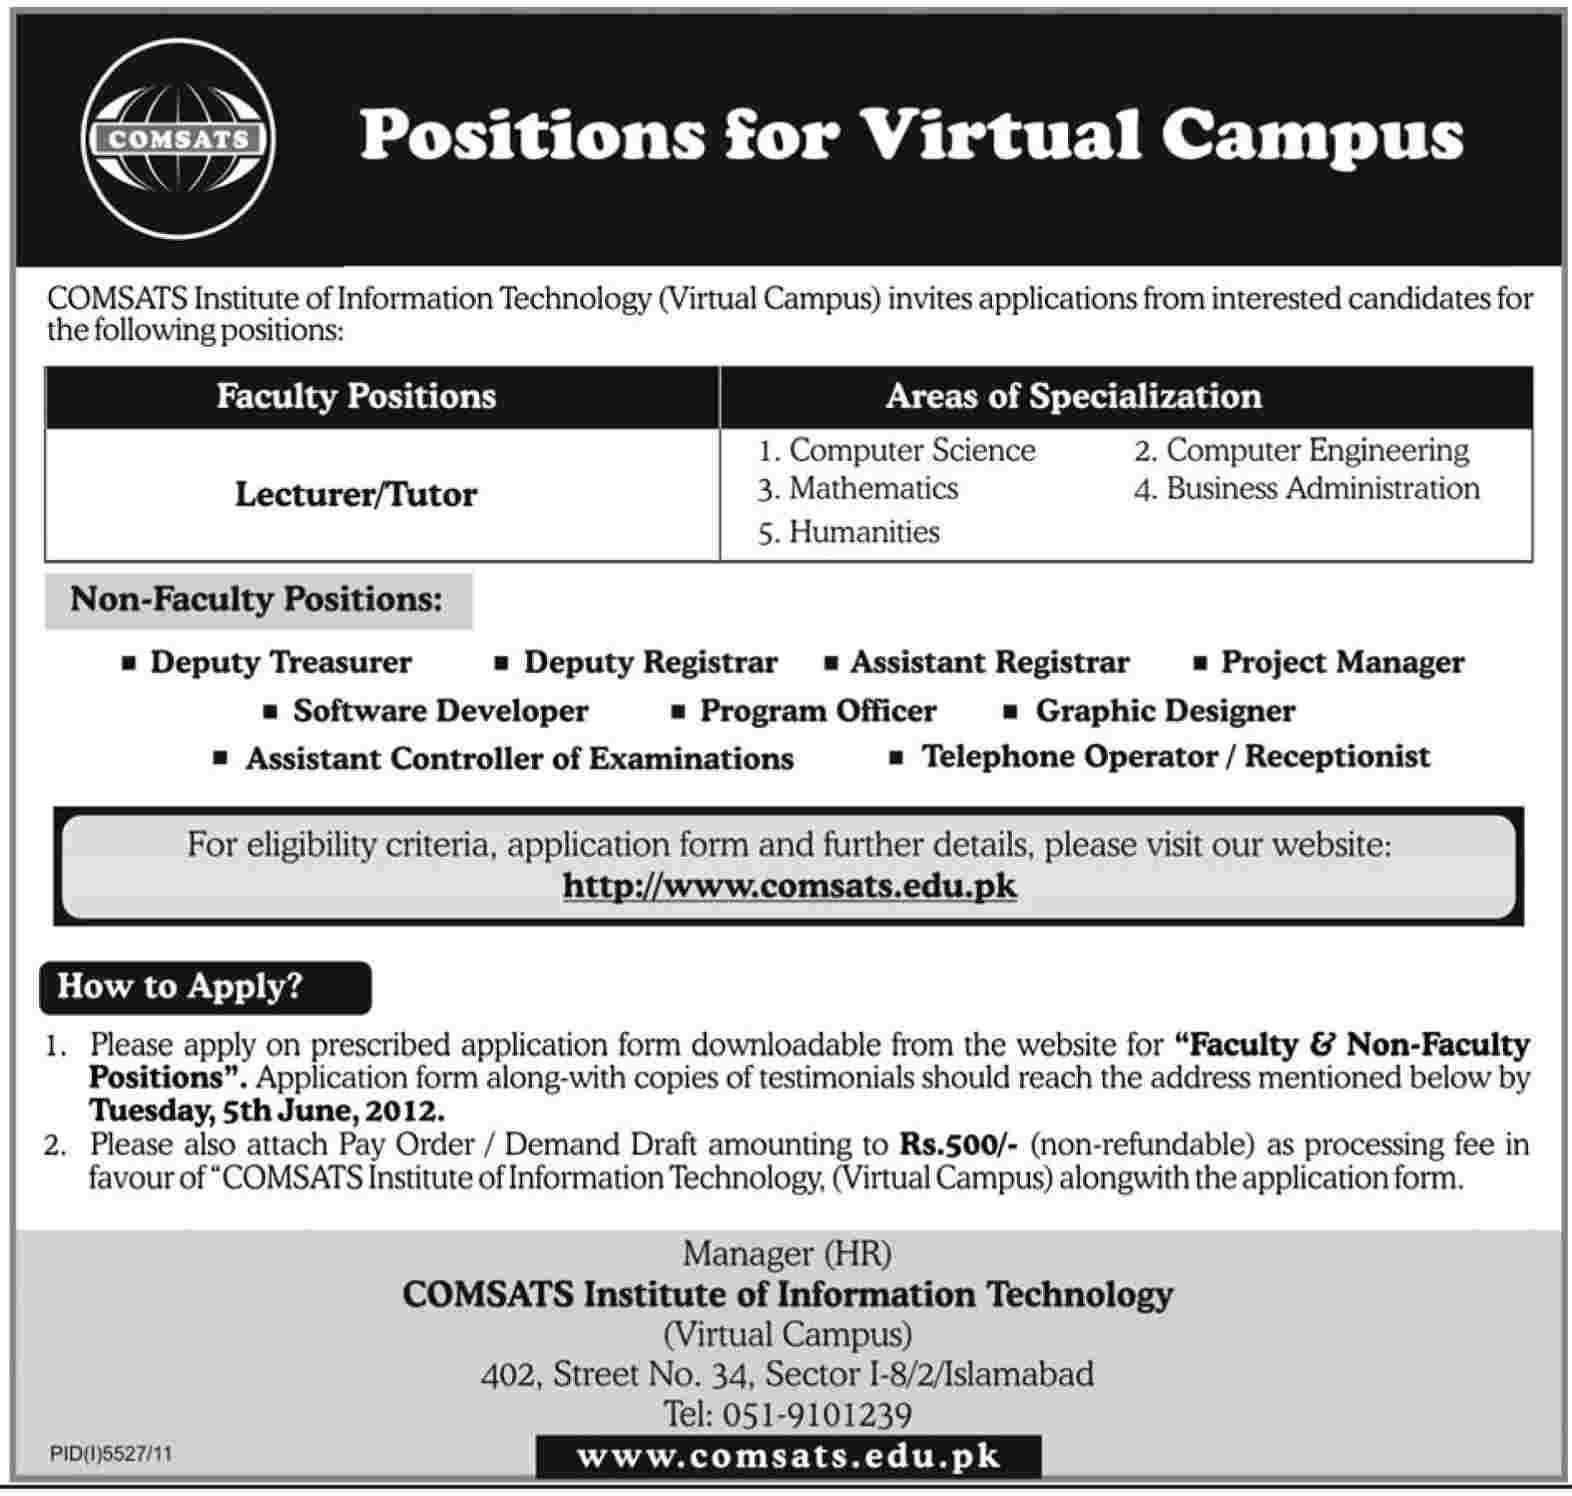 Teaching and Non-Teaching Staff Required at COMSATS University (Virtual Campus)